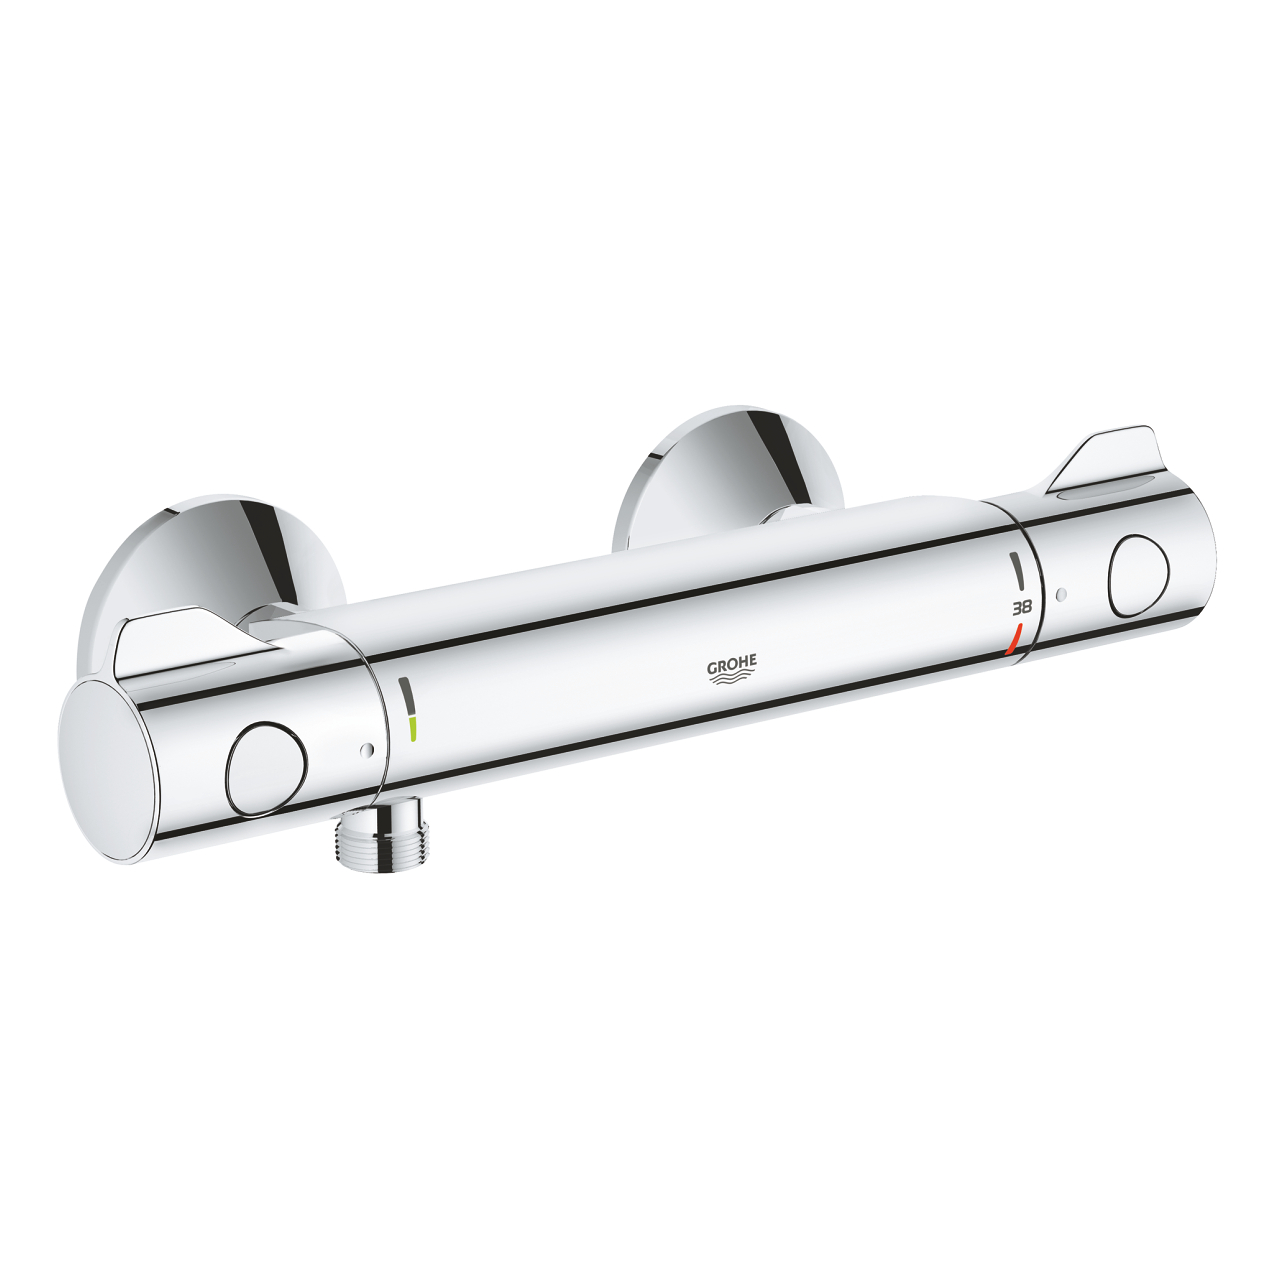 inrichting Bukken houder Product: Grohe Grohtherm 800 thermostaatkraan 150mm - A.J. Loots